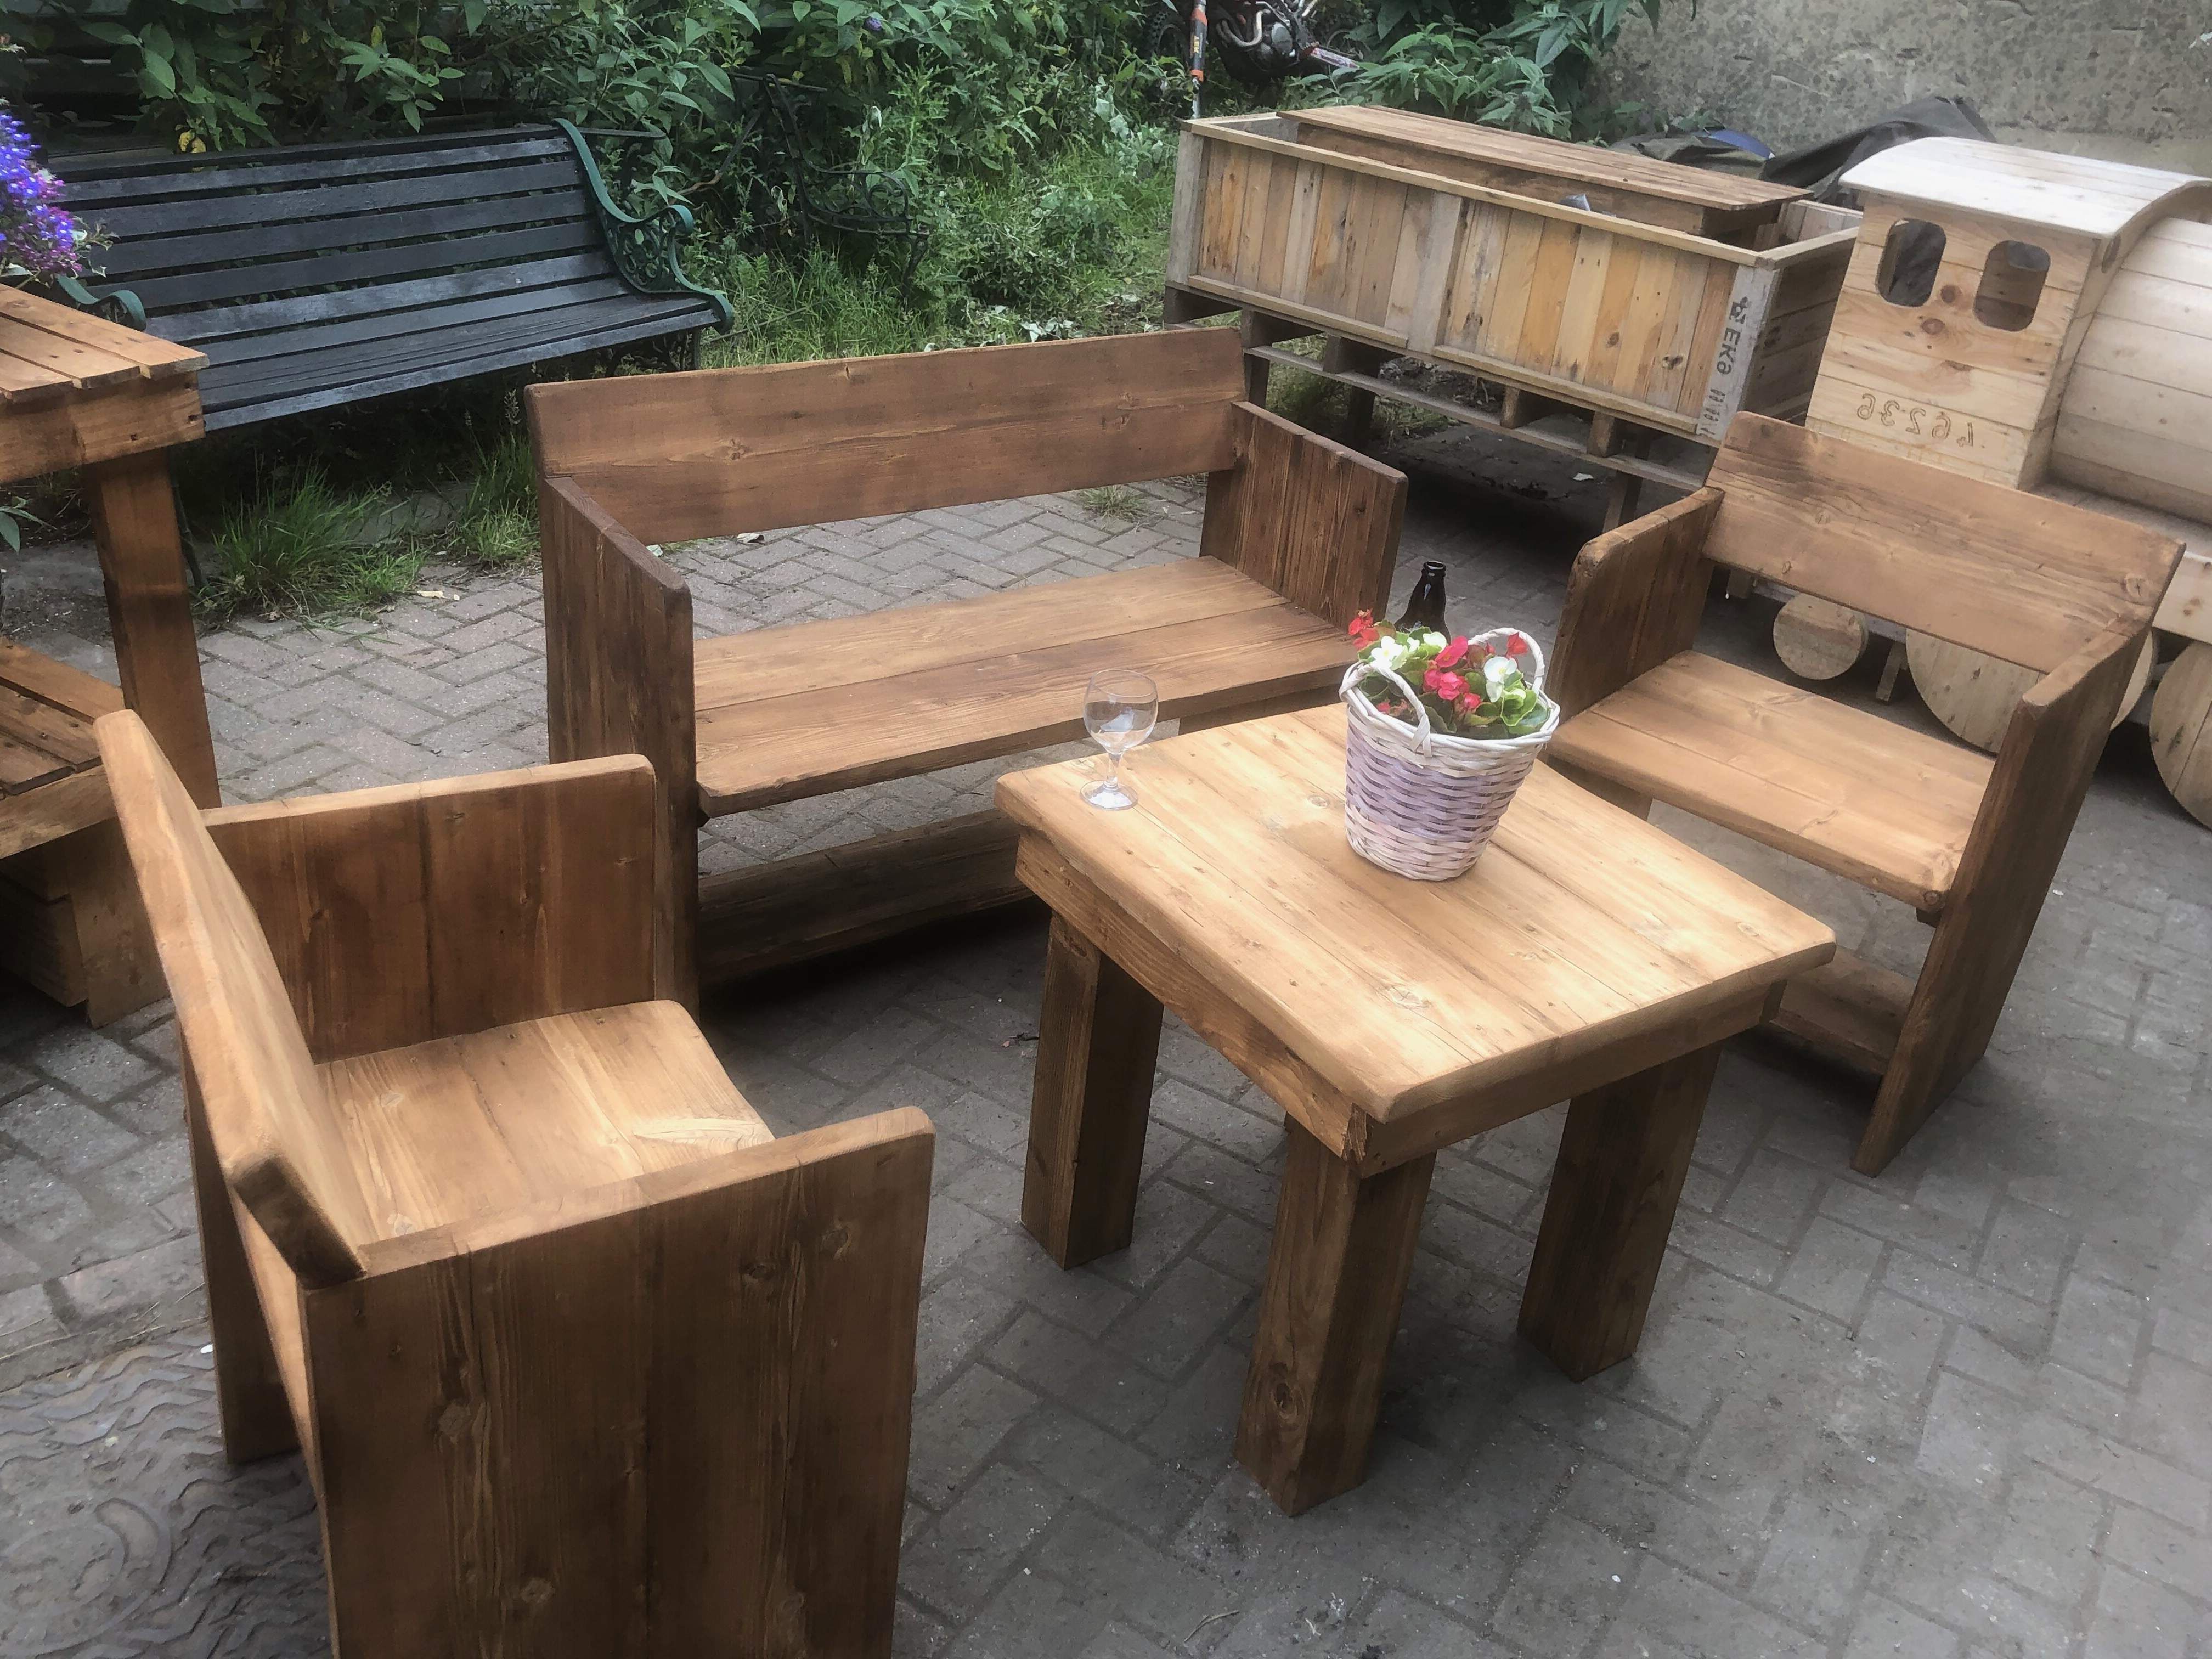 Standard Patio Furniture Set Throughout Well Known Outdoor Terrace Bench Wood Furniture Set (View 3 of 15)